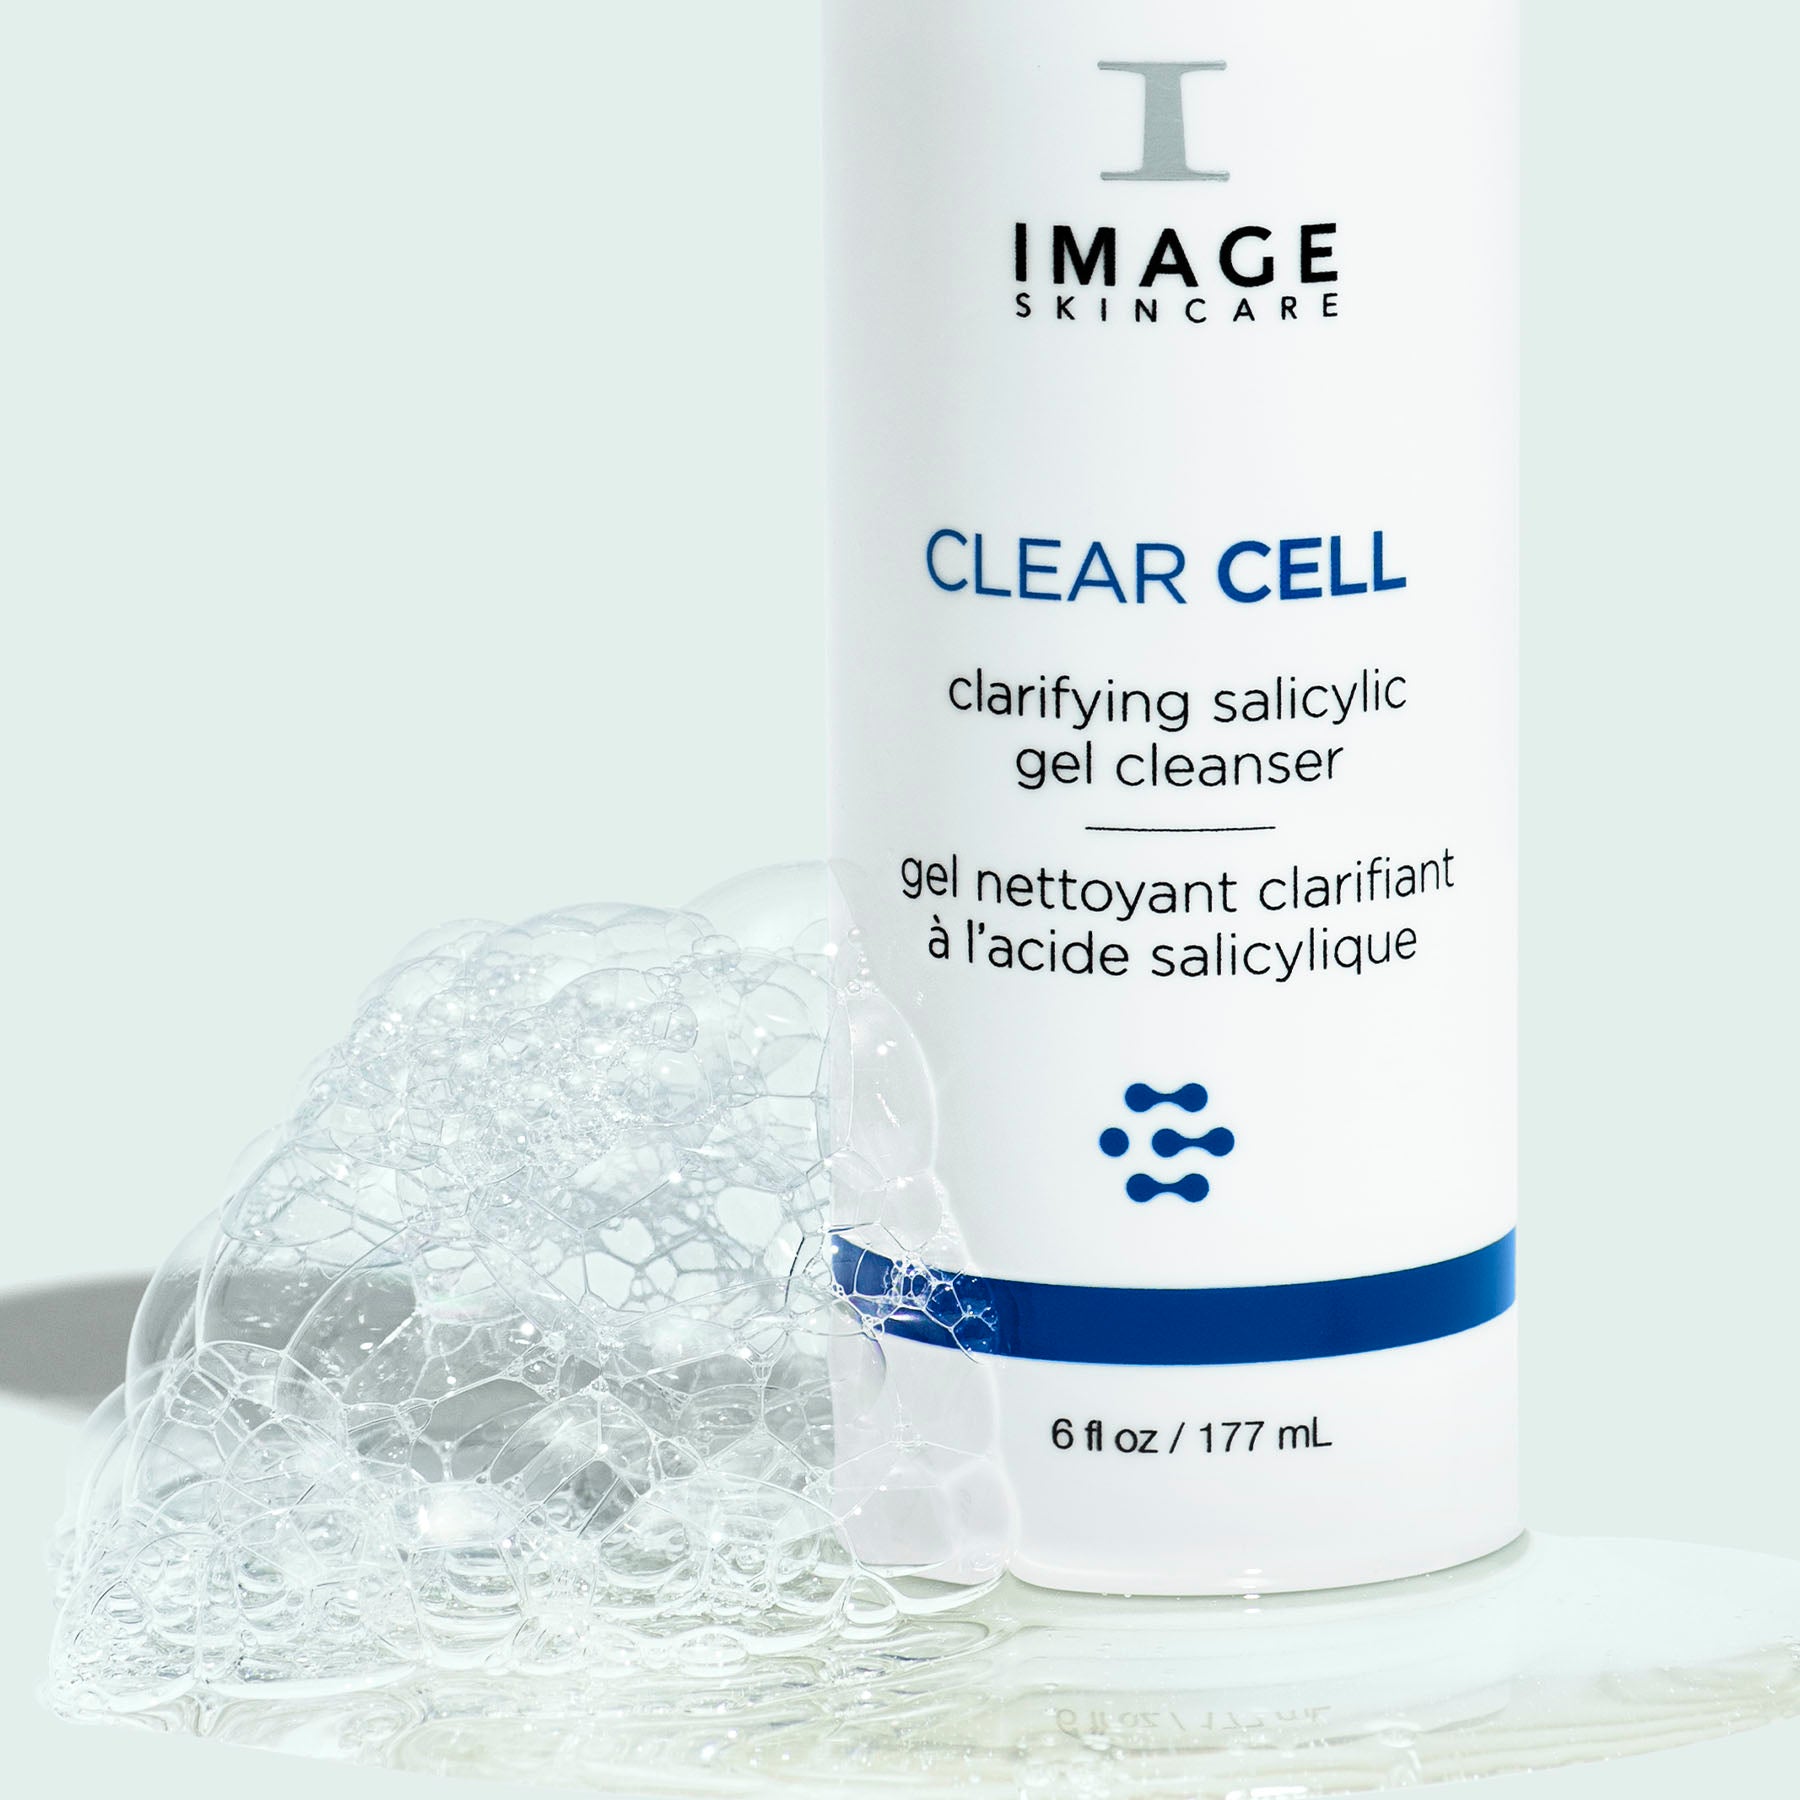 Image Skincare - Clear Cell - Salicylic Gel Cleanser